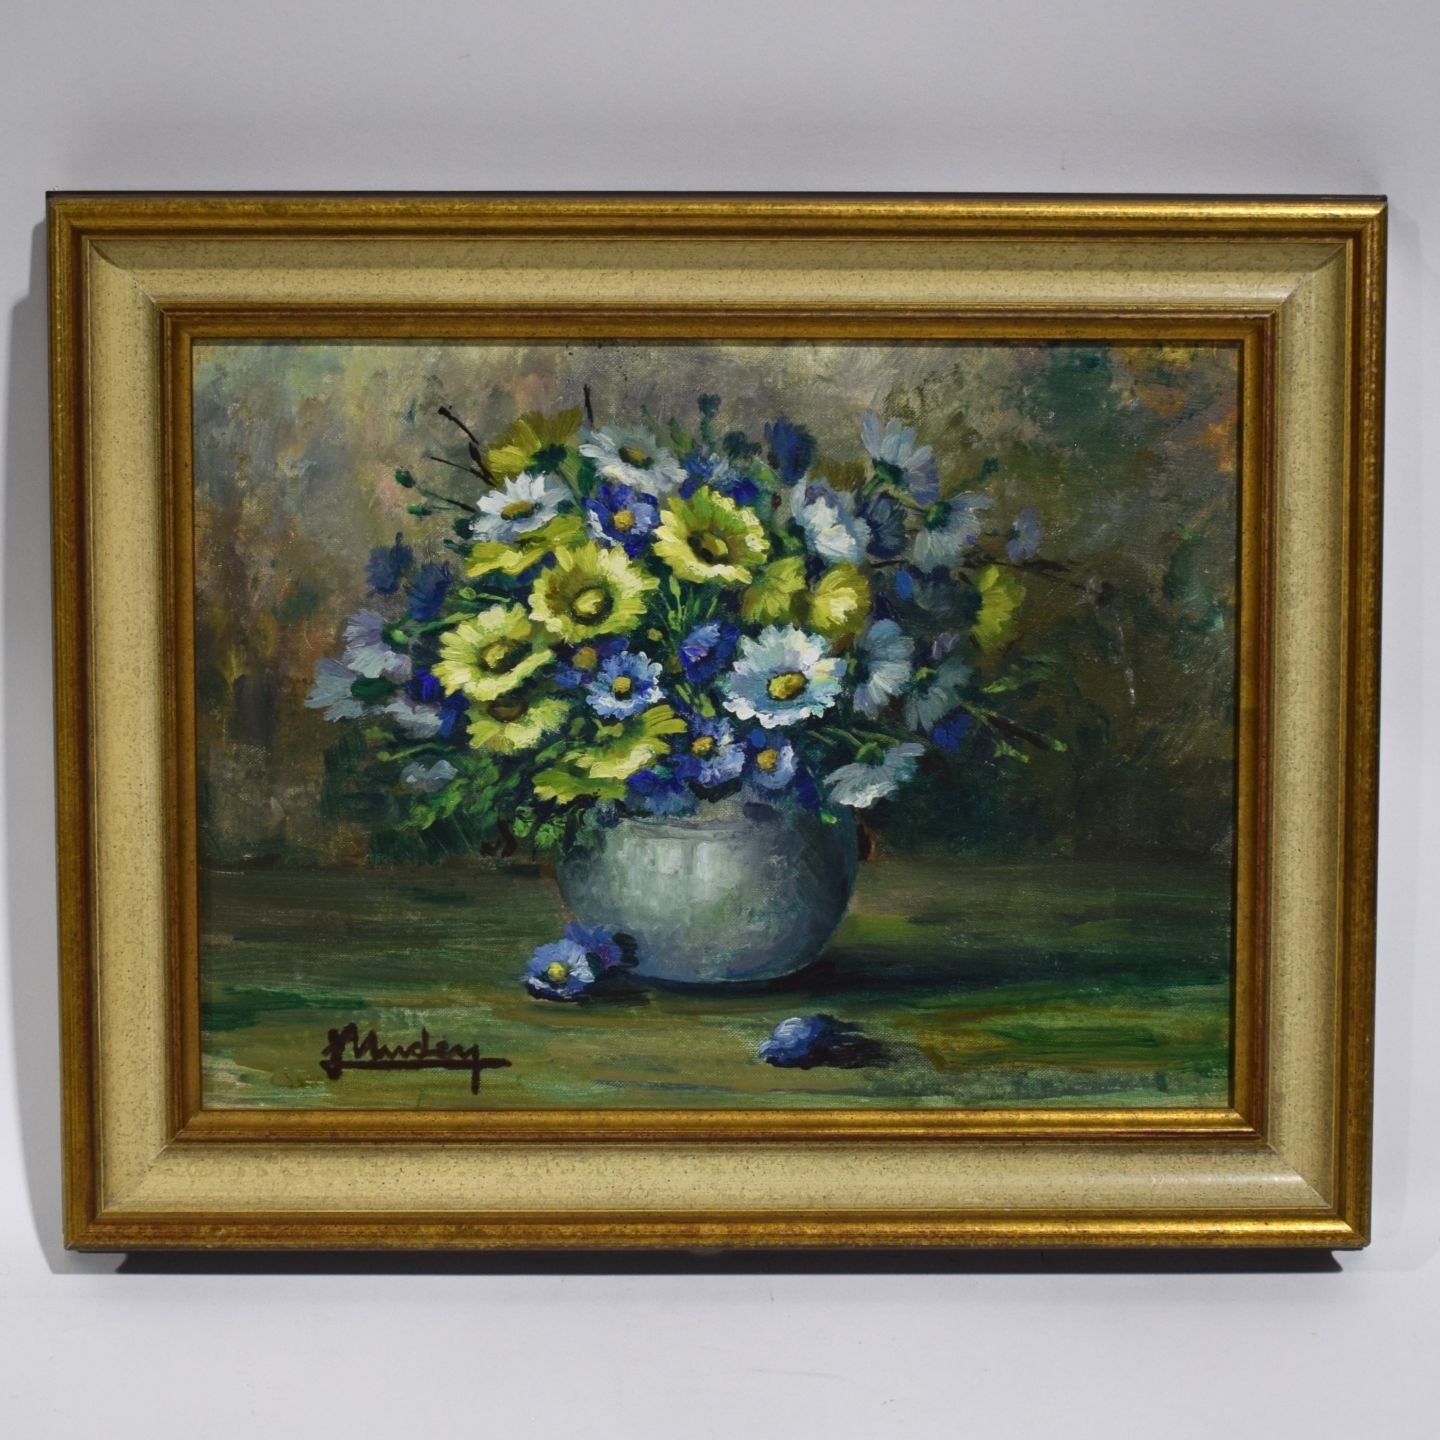 Artwork by Lilly Unden, Lily UNDEN (1908-1989), Made of Oil on canvas